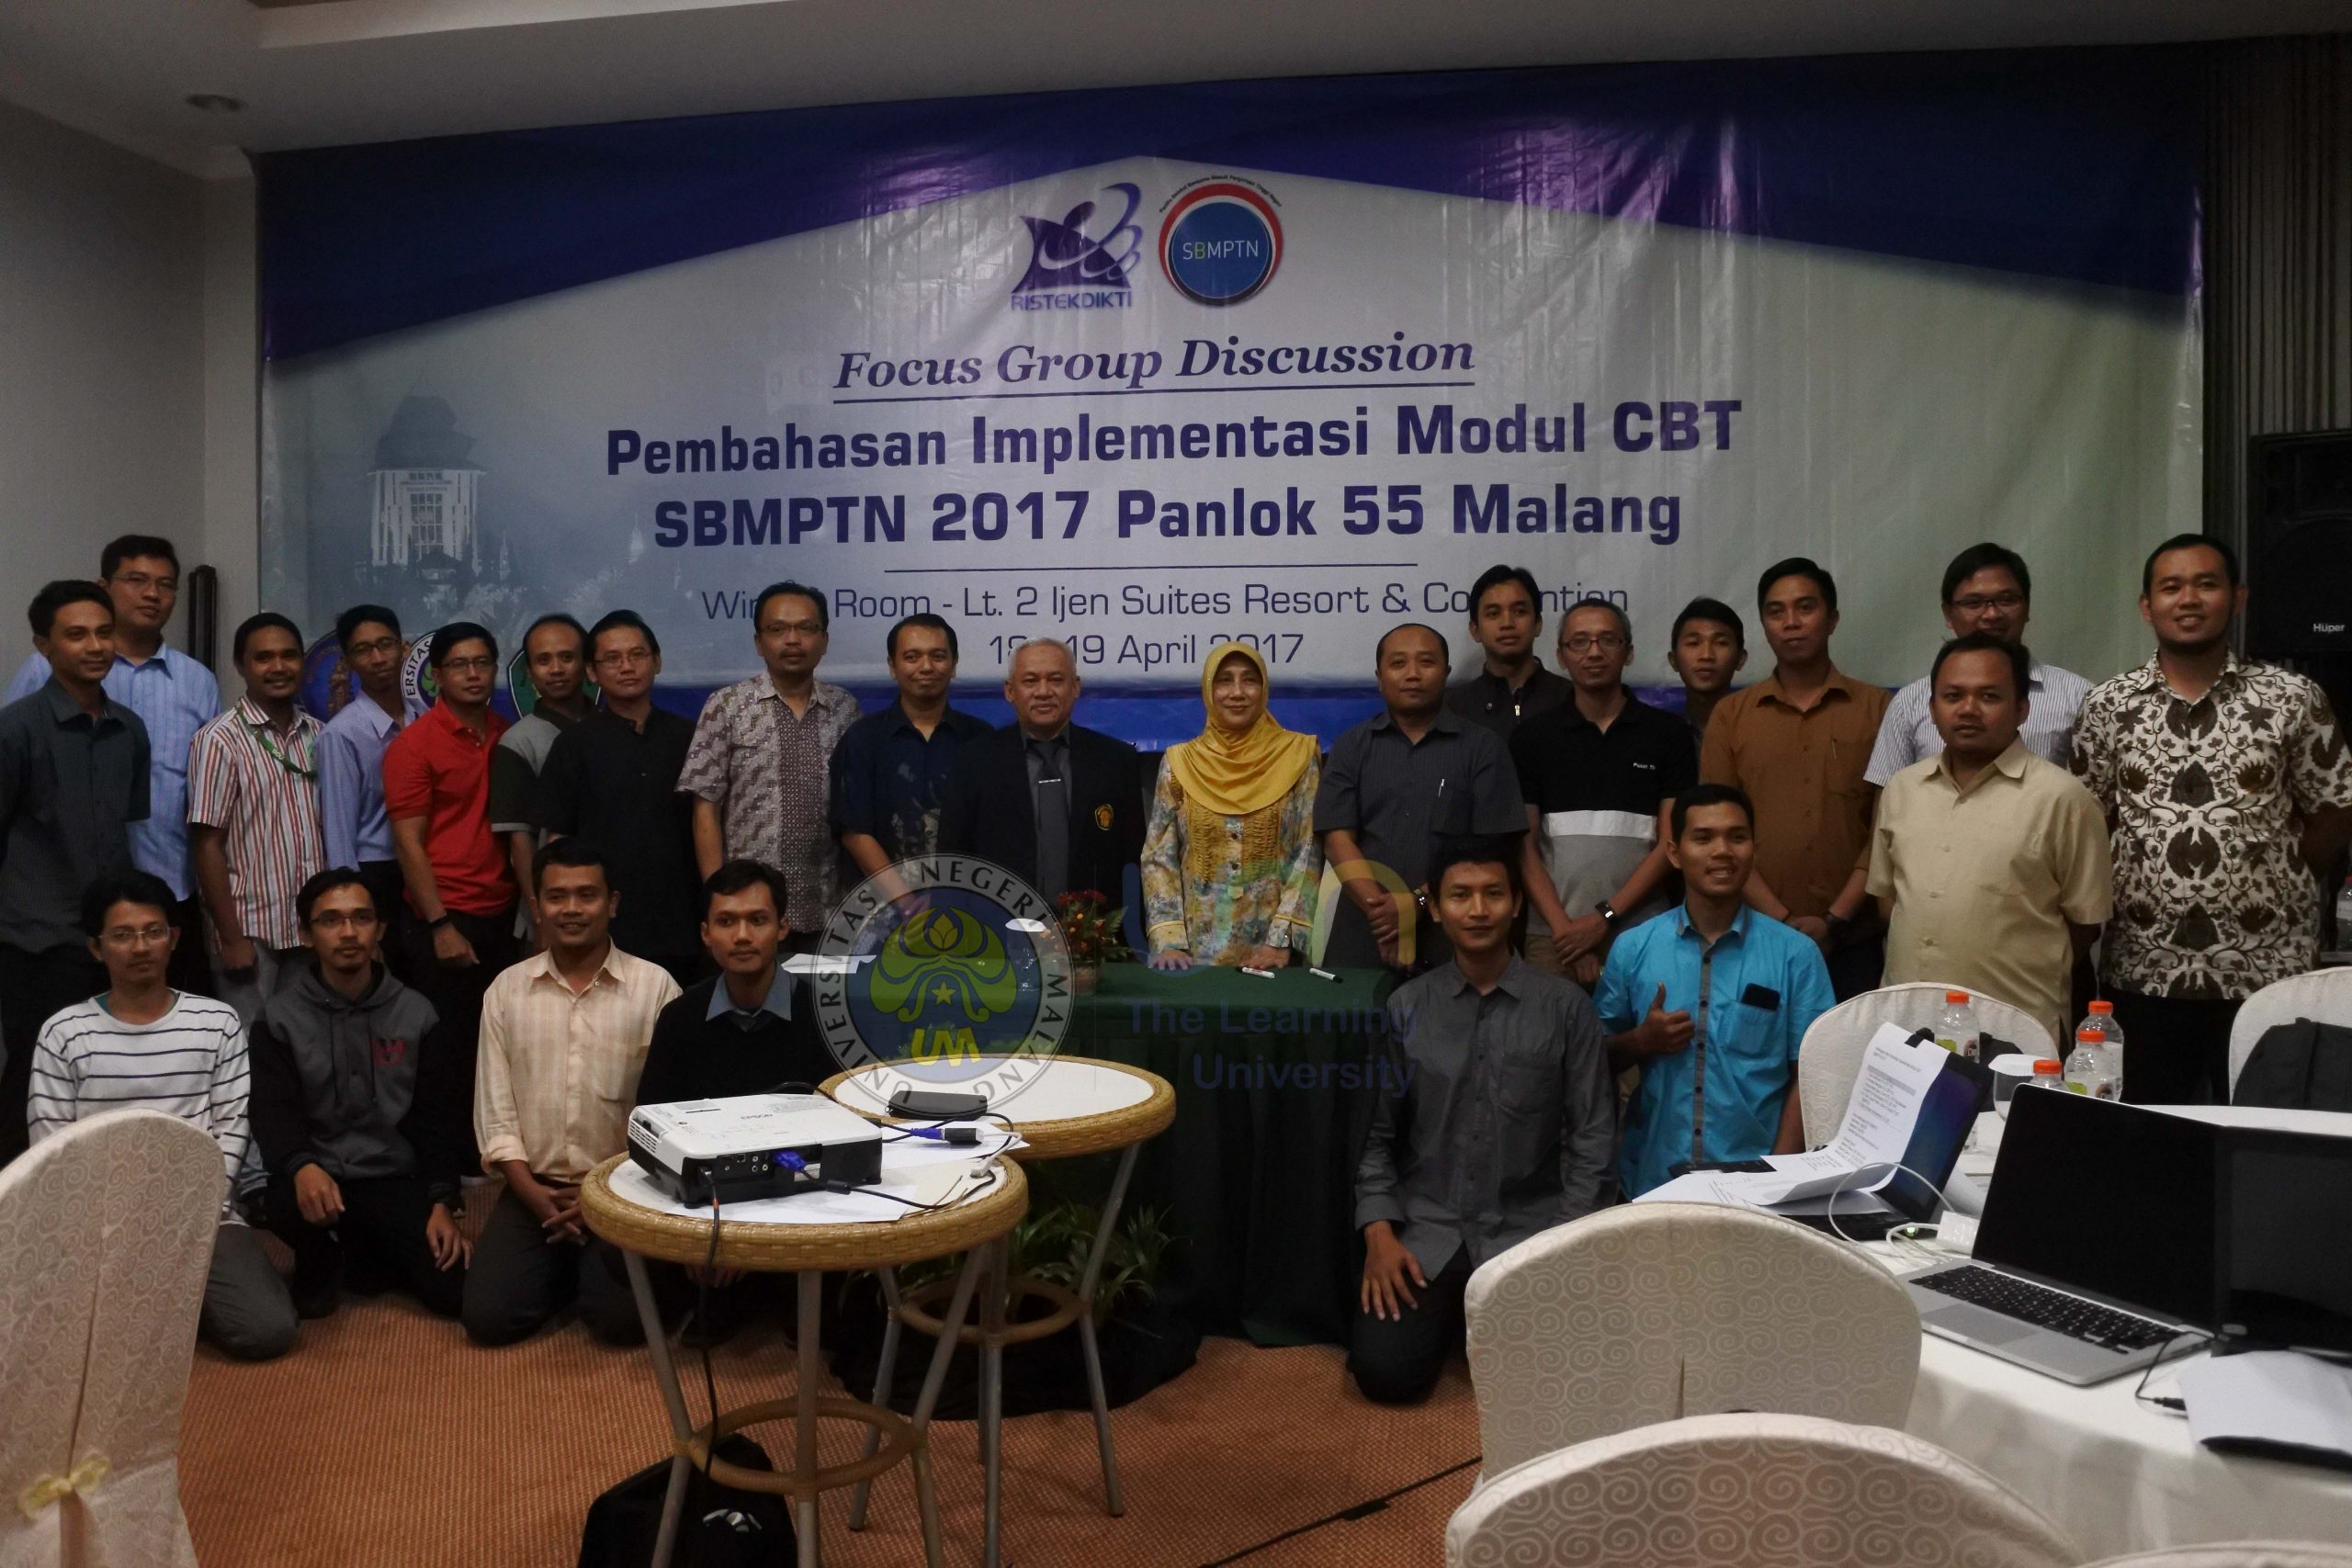 Discussion on the Implementation of the 2017 SBMPTN CBT Module at Panlok 55 Malang